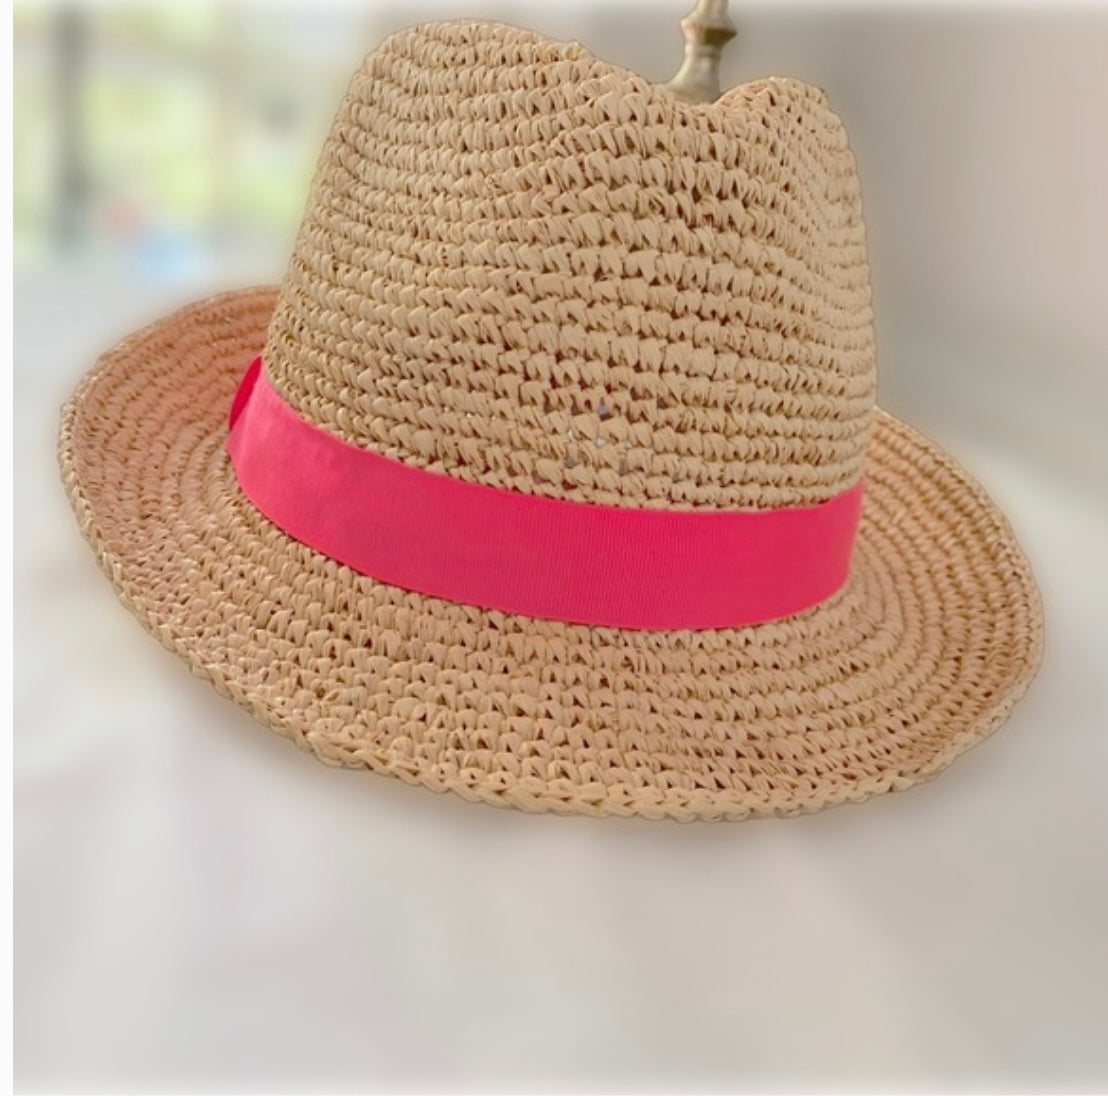 Lilly Pulitzer Poolside Hat - Prosecco Pink - BHI